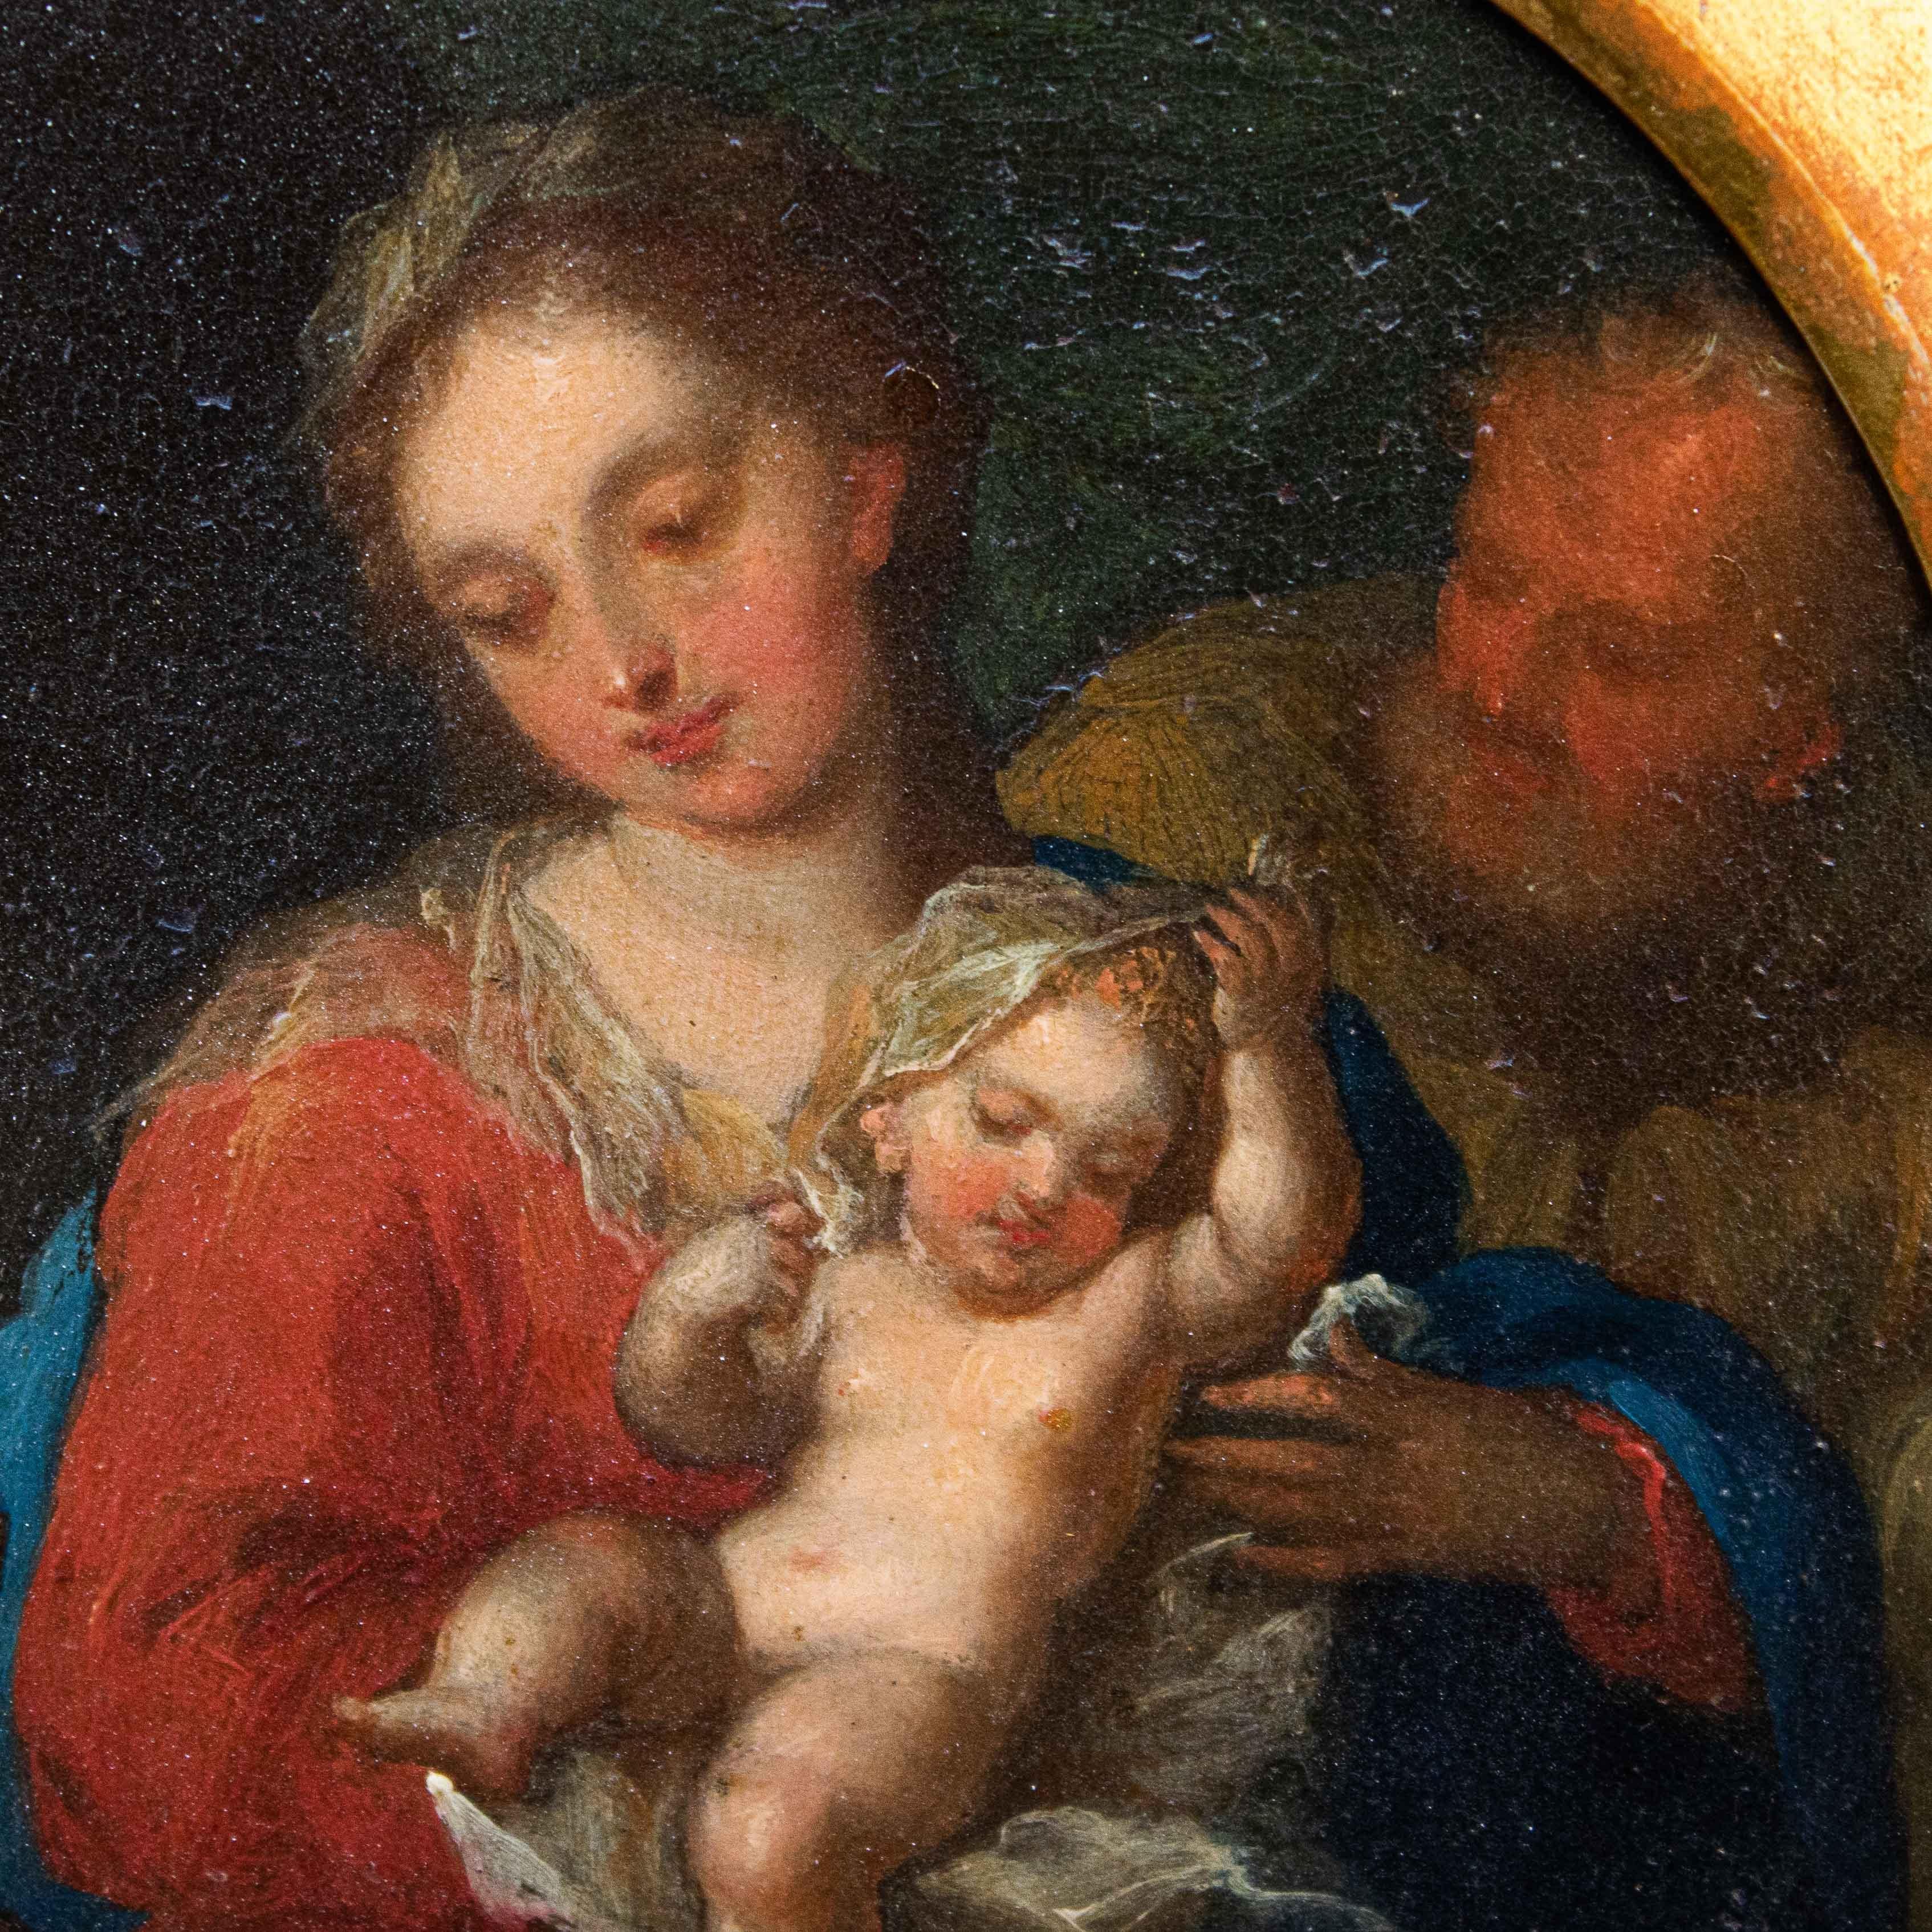 17th century, Italian school
Holy family with angel
Oil on copper, 16 x 14 cm - with frame 26 x 24 cm

The preferential use of a warm color range, with almost earthy tones, gives this rummy a sense of suspended grace. There is a canonical Holy